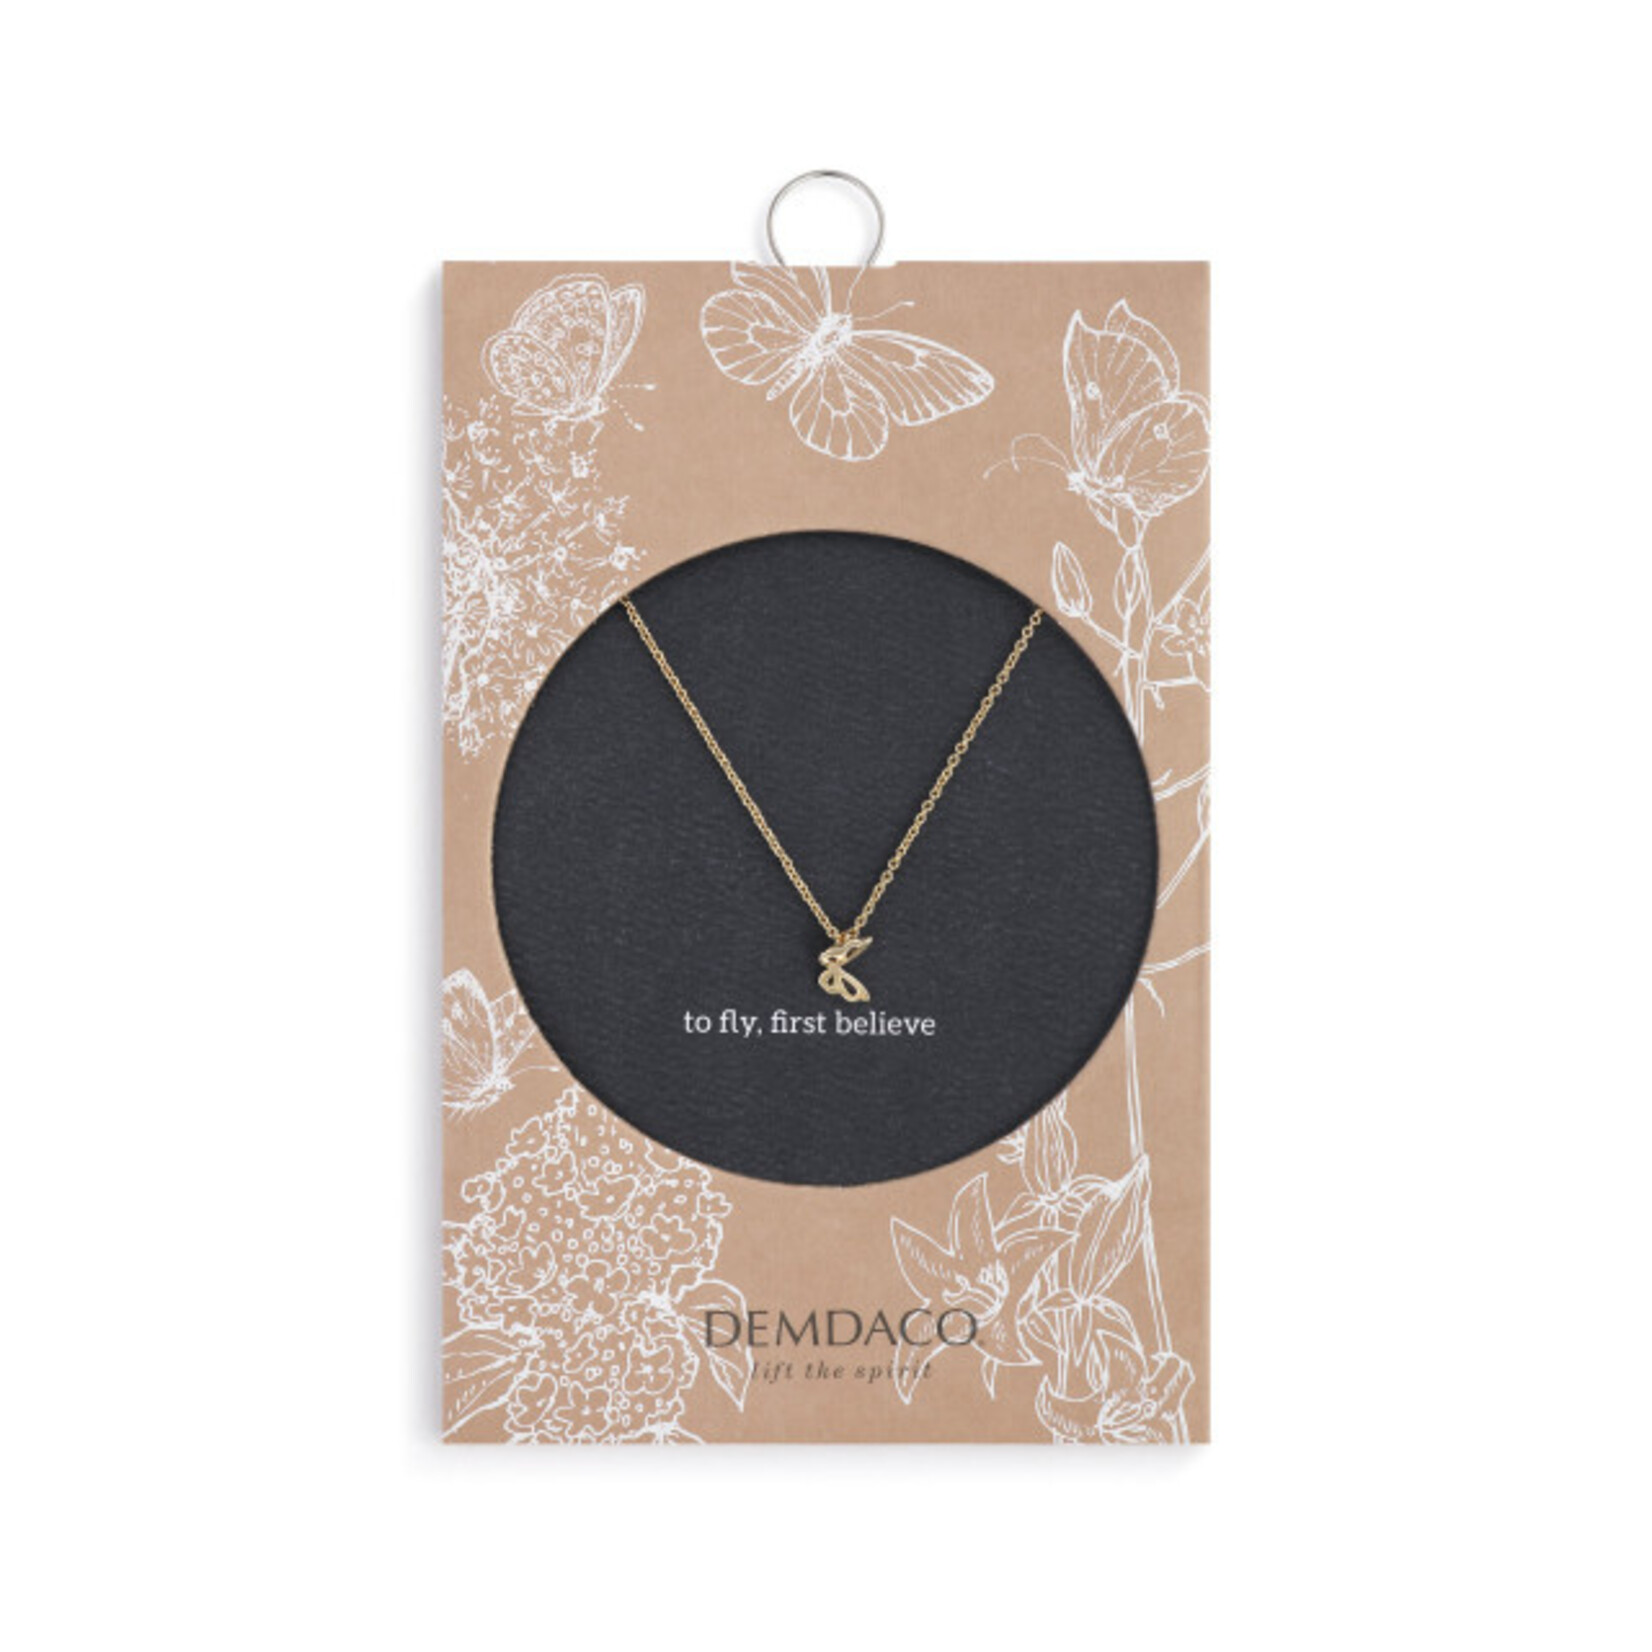 Demdaco Simply Believe Necklace with Gold Butterfly Pendant